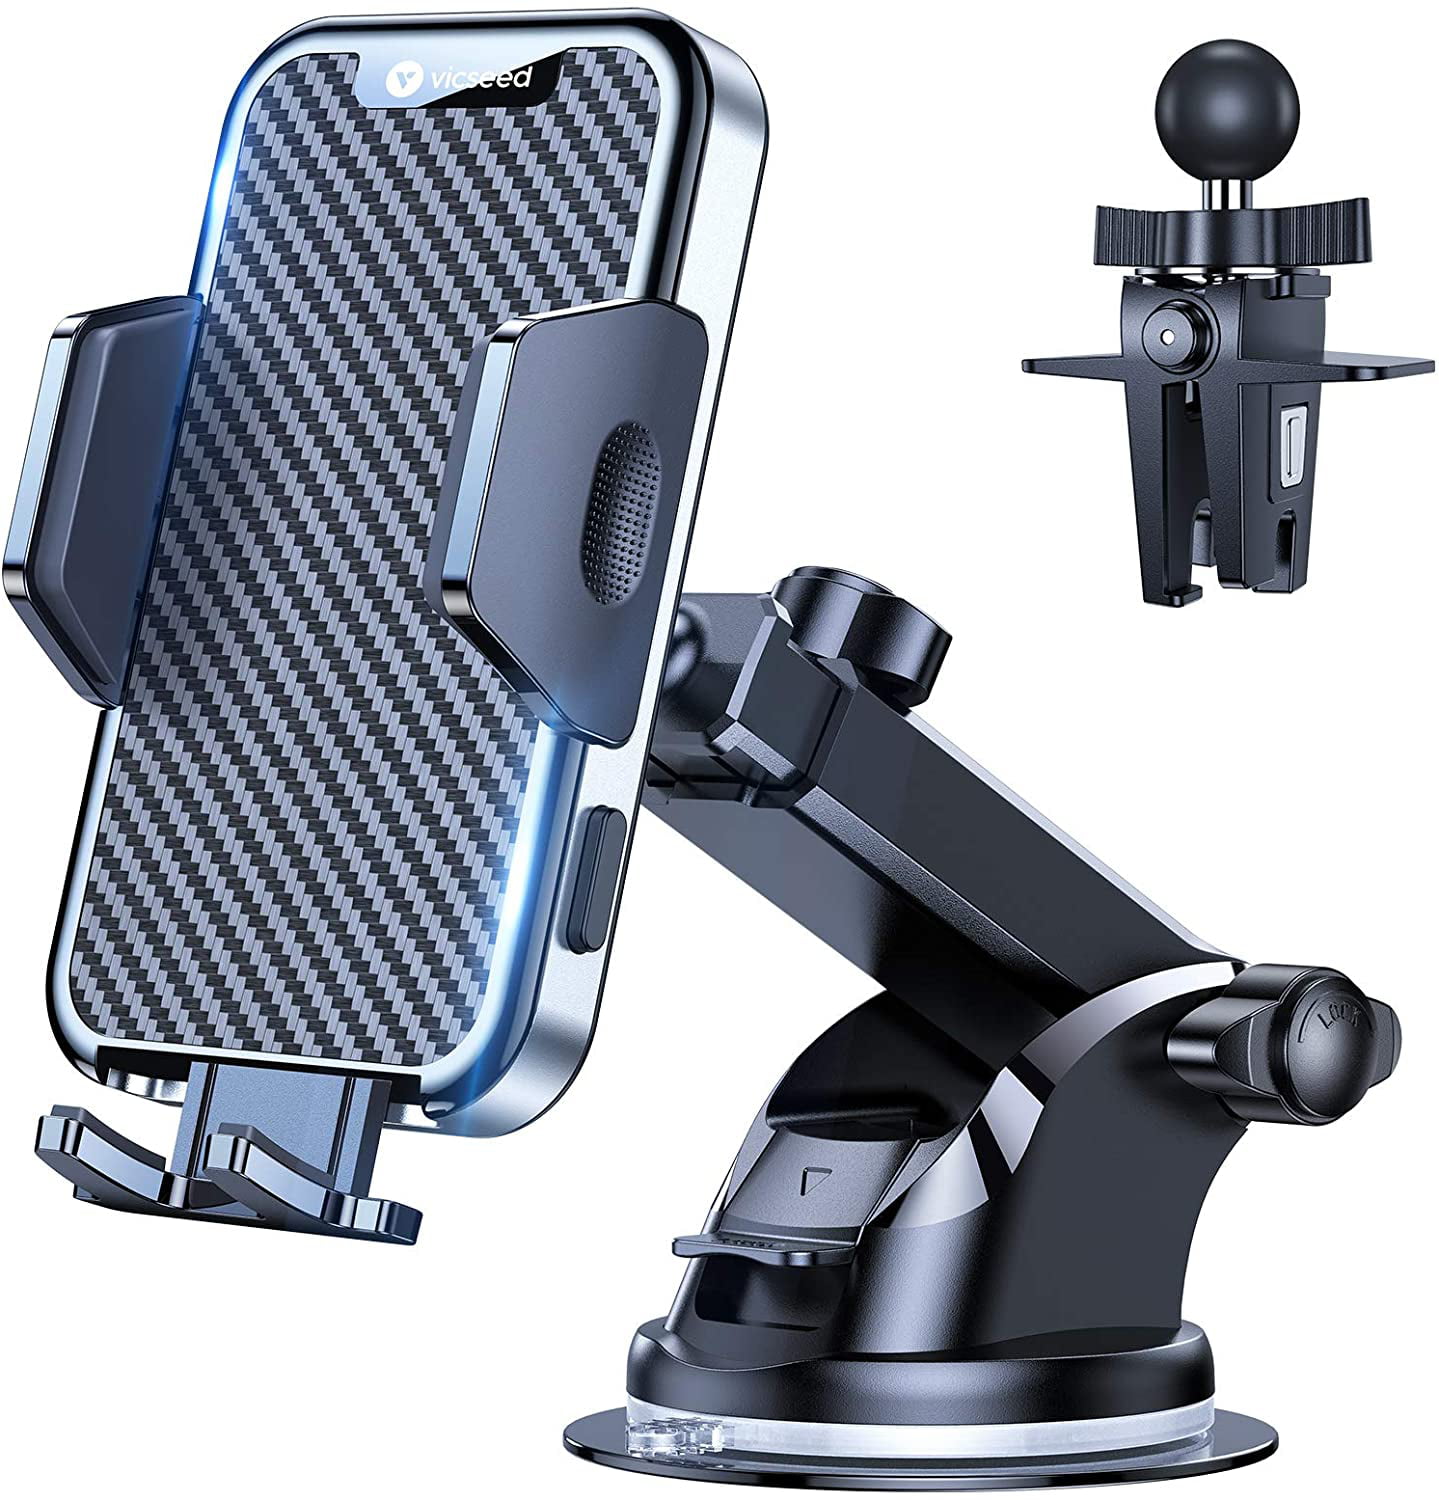 WixGear Universal Dashboard Windshield Phone Car Suction Cup Mount Holder for Cell Phone 360 Degree Rotation Compatible with iPhone Xs/XS Max 6 Galaxy S and More Phone Holder for Car 8/7 